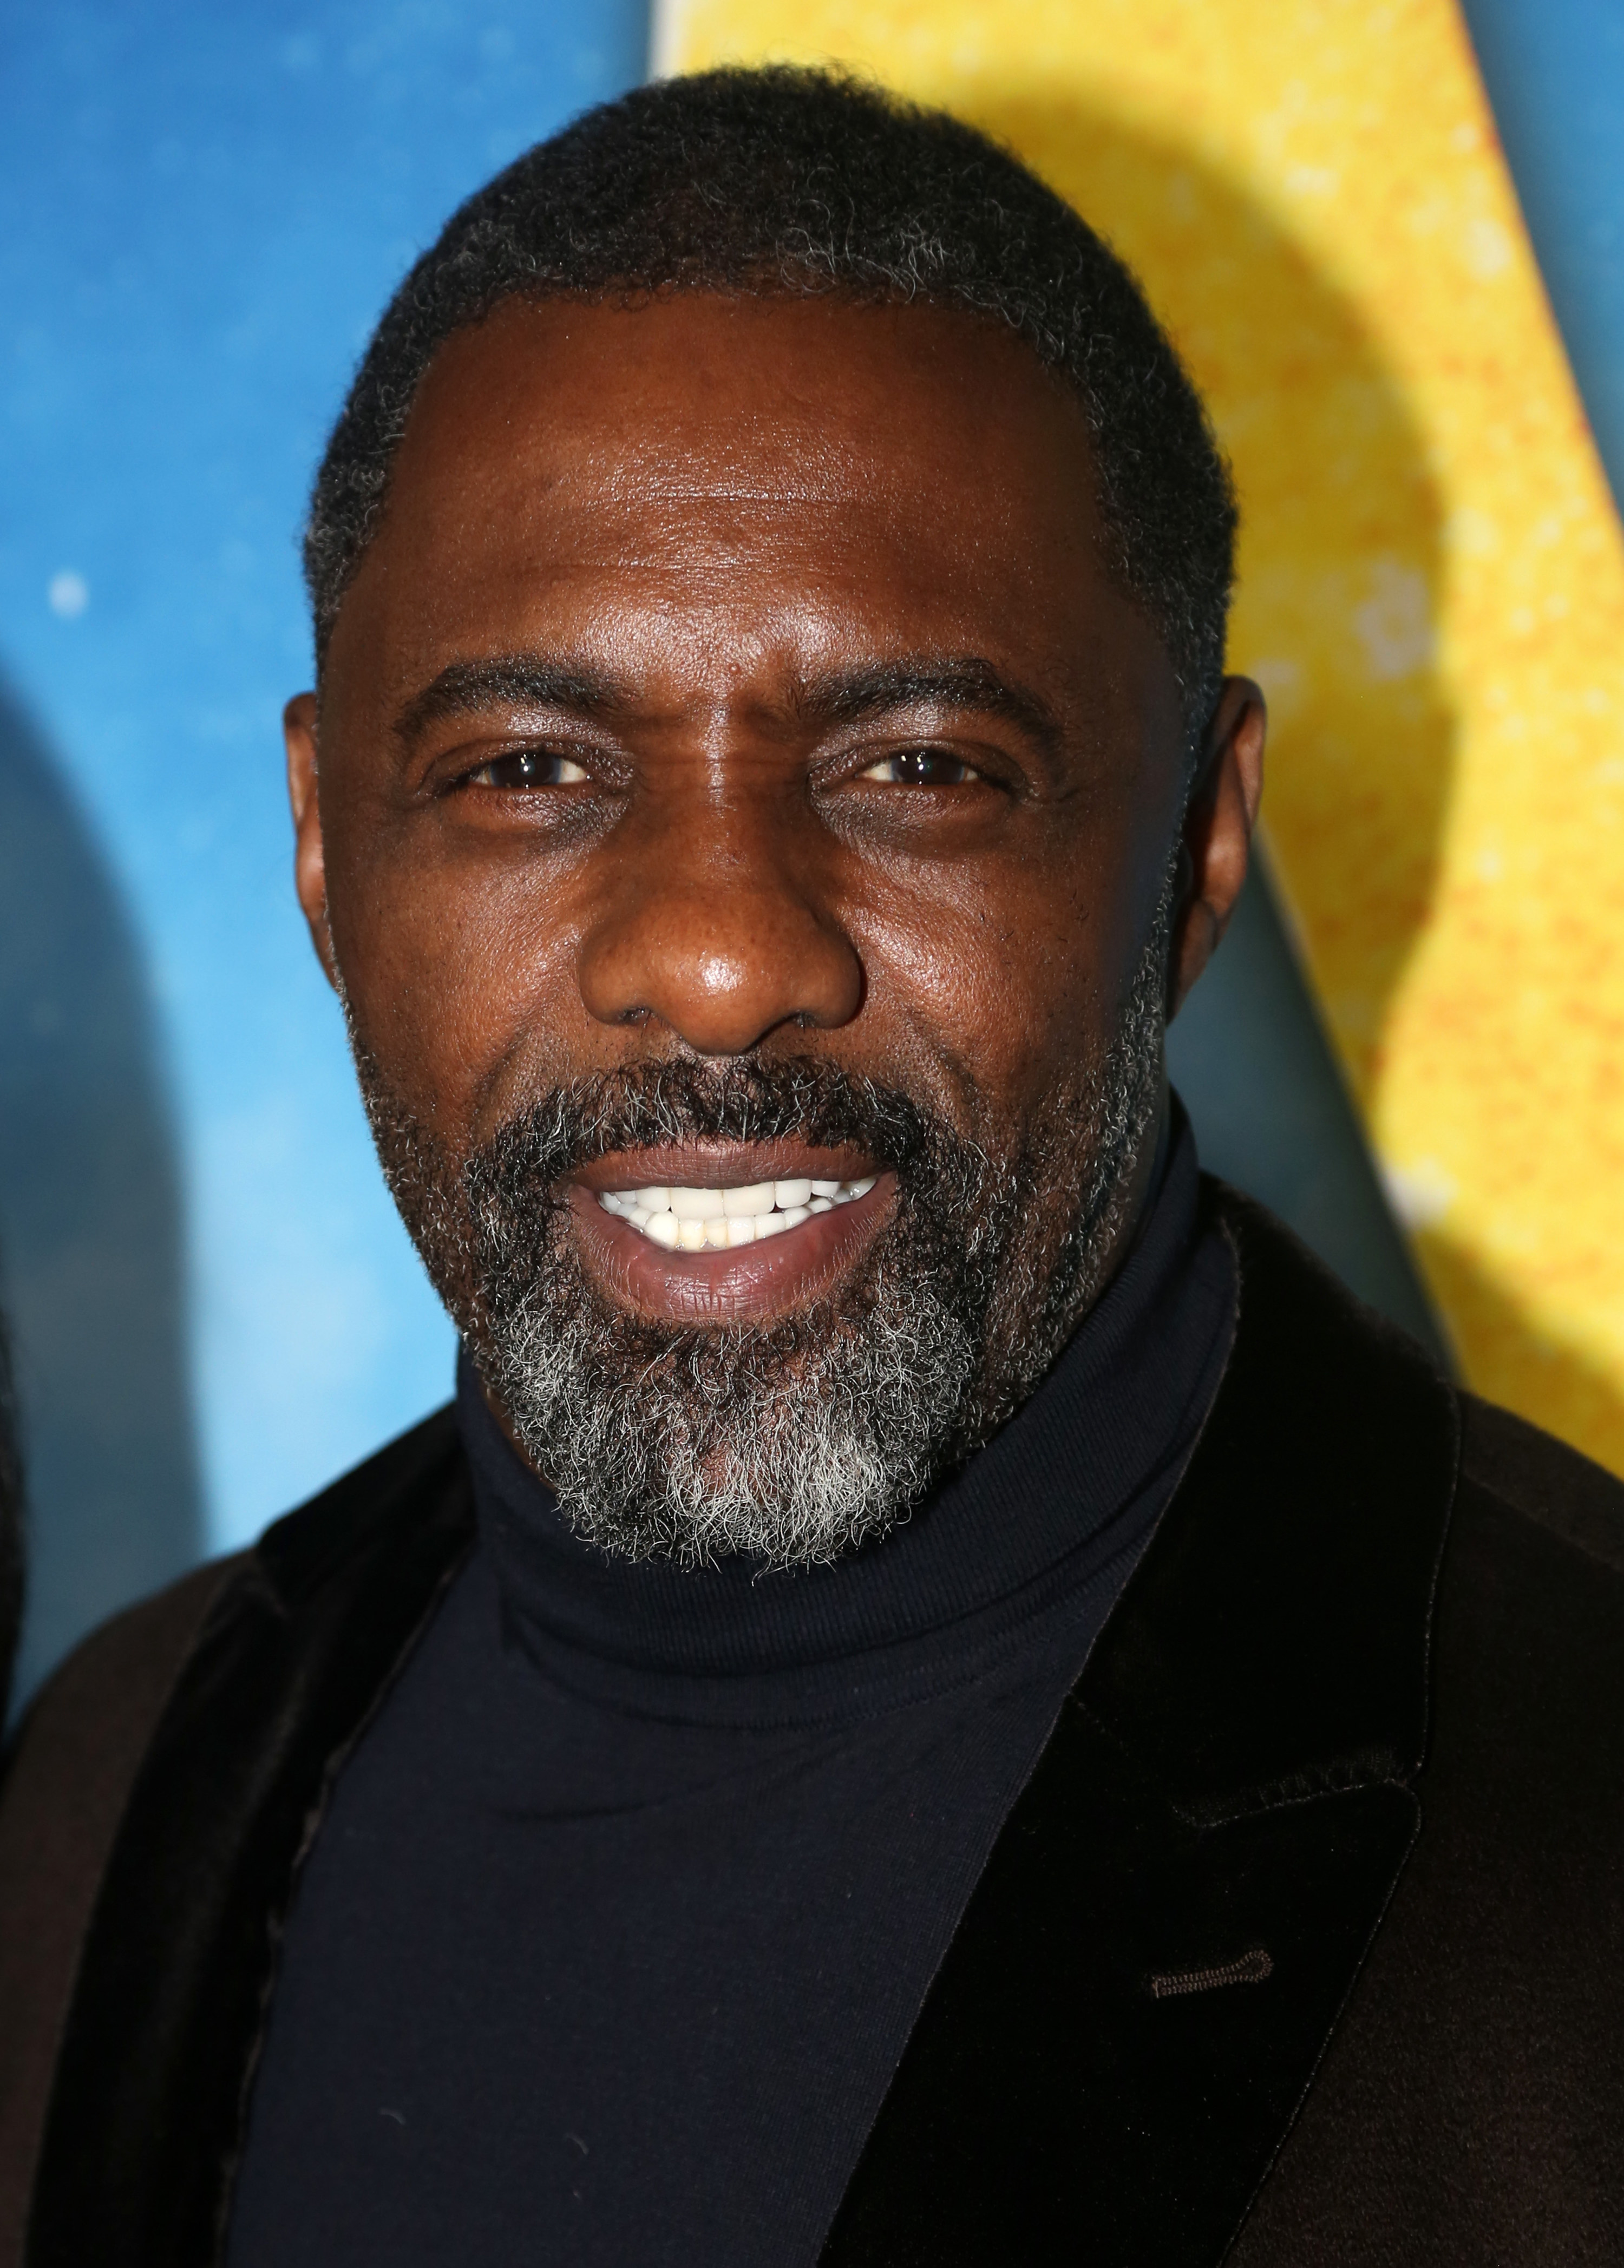 Idris Elba is pictured smiling at an event